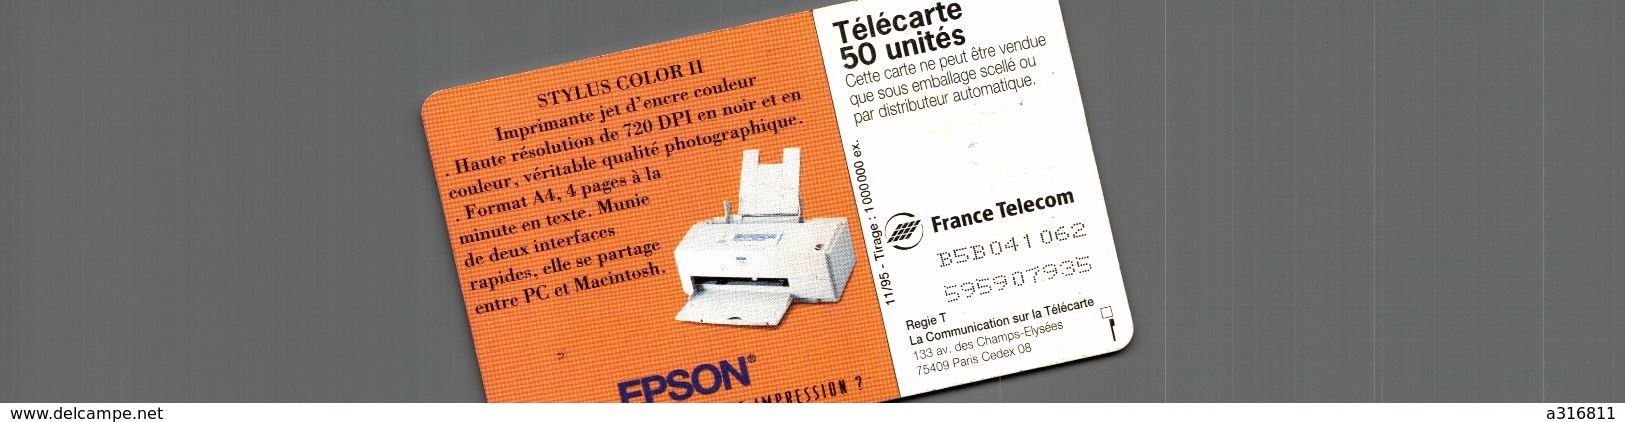 EPSON - Phonecards: Private Use